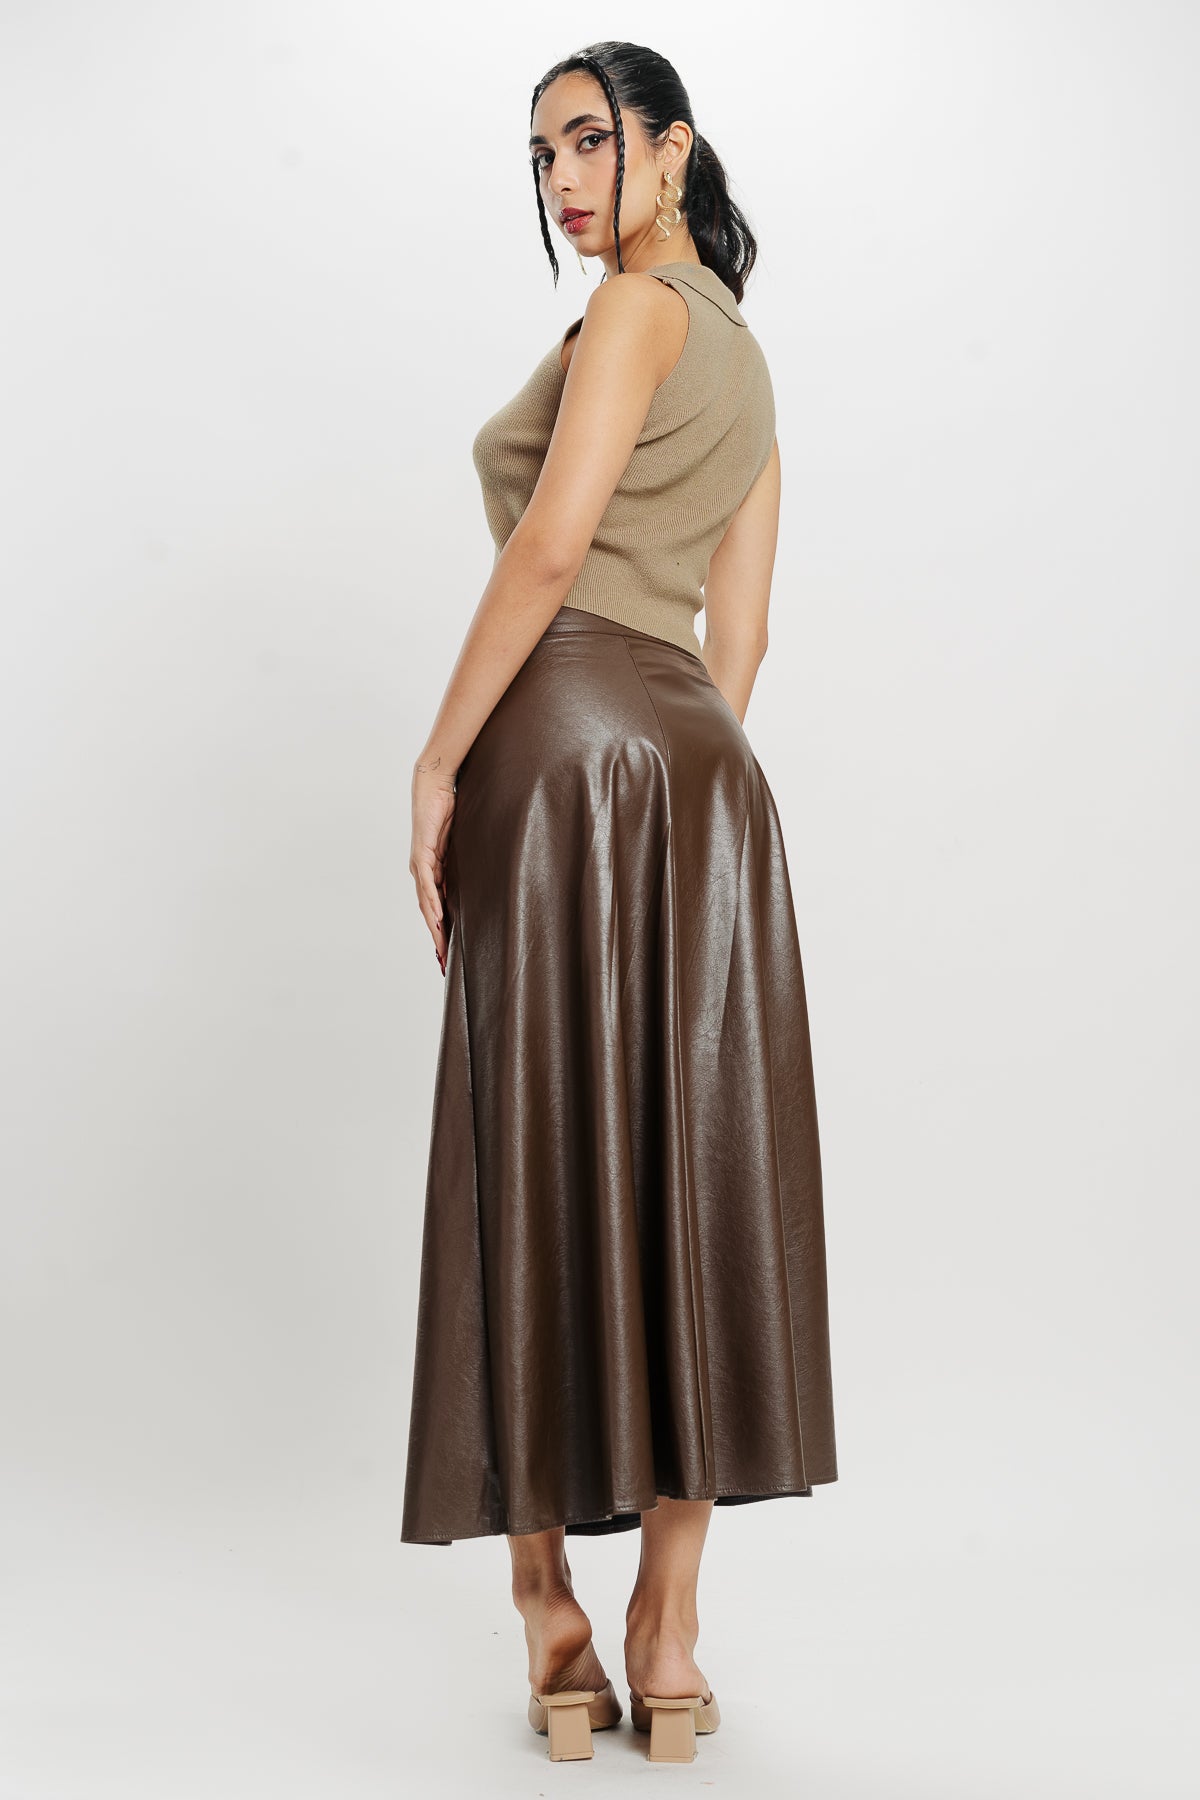 BROWN FLARED LEATHER SKIRT